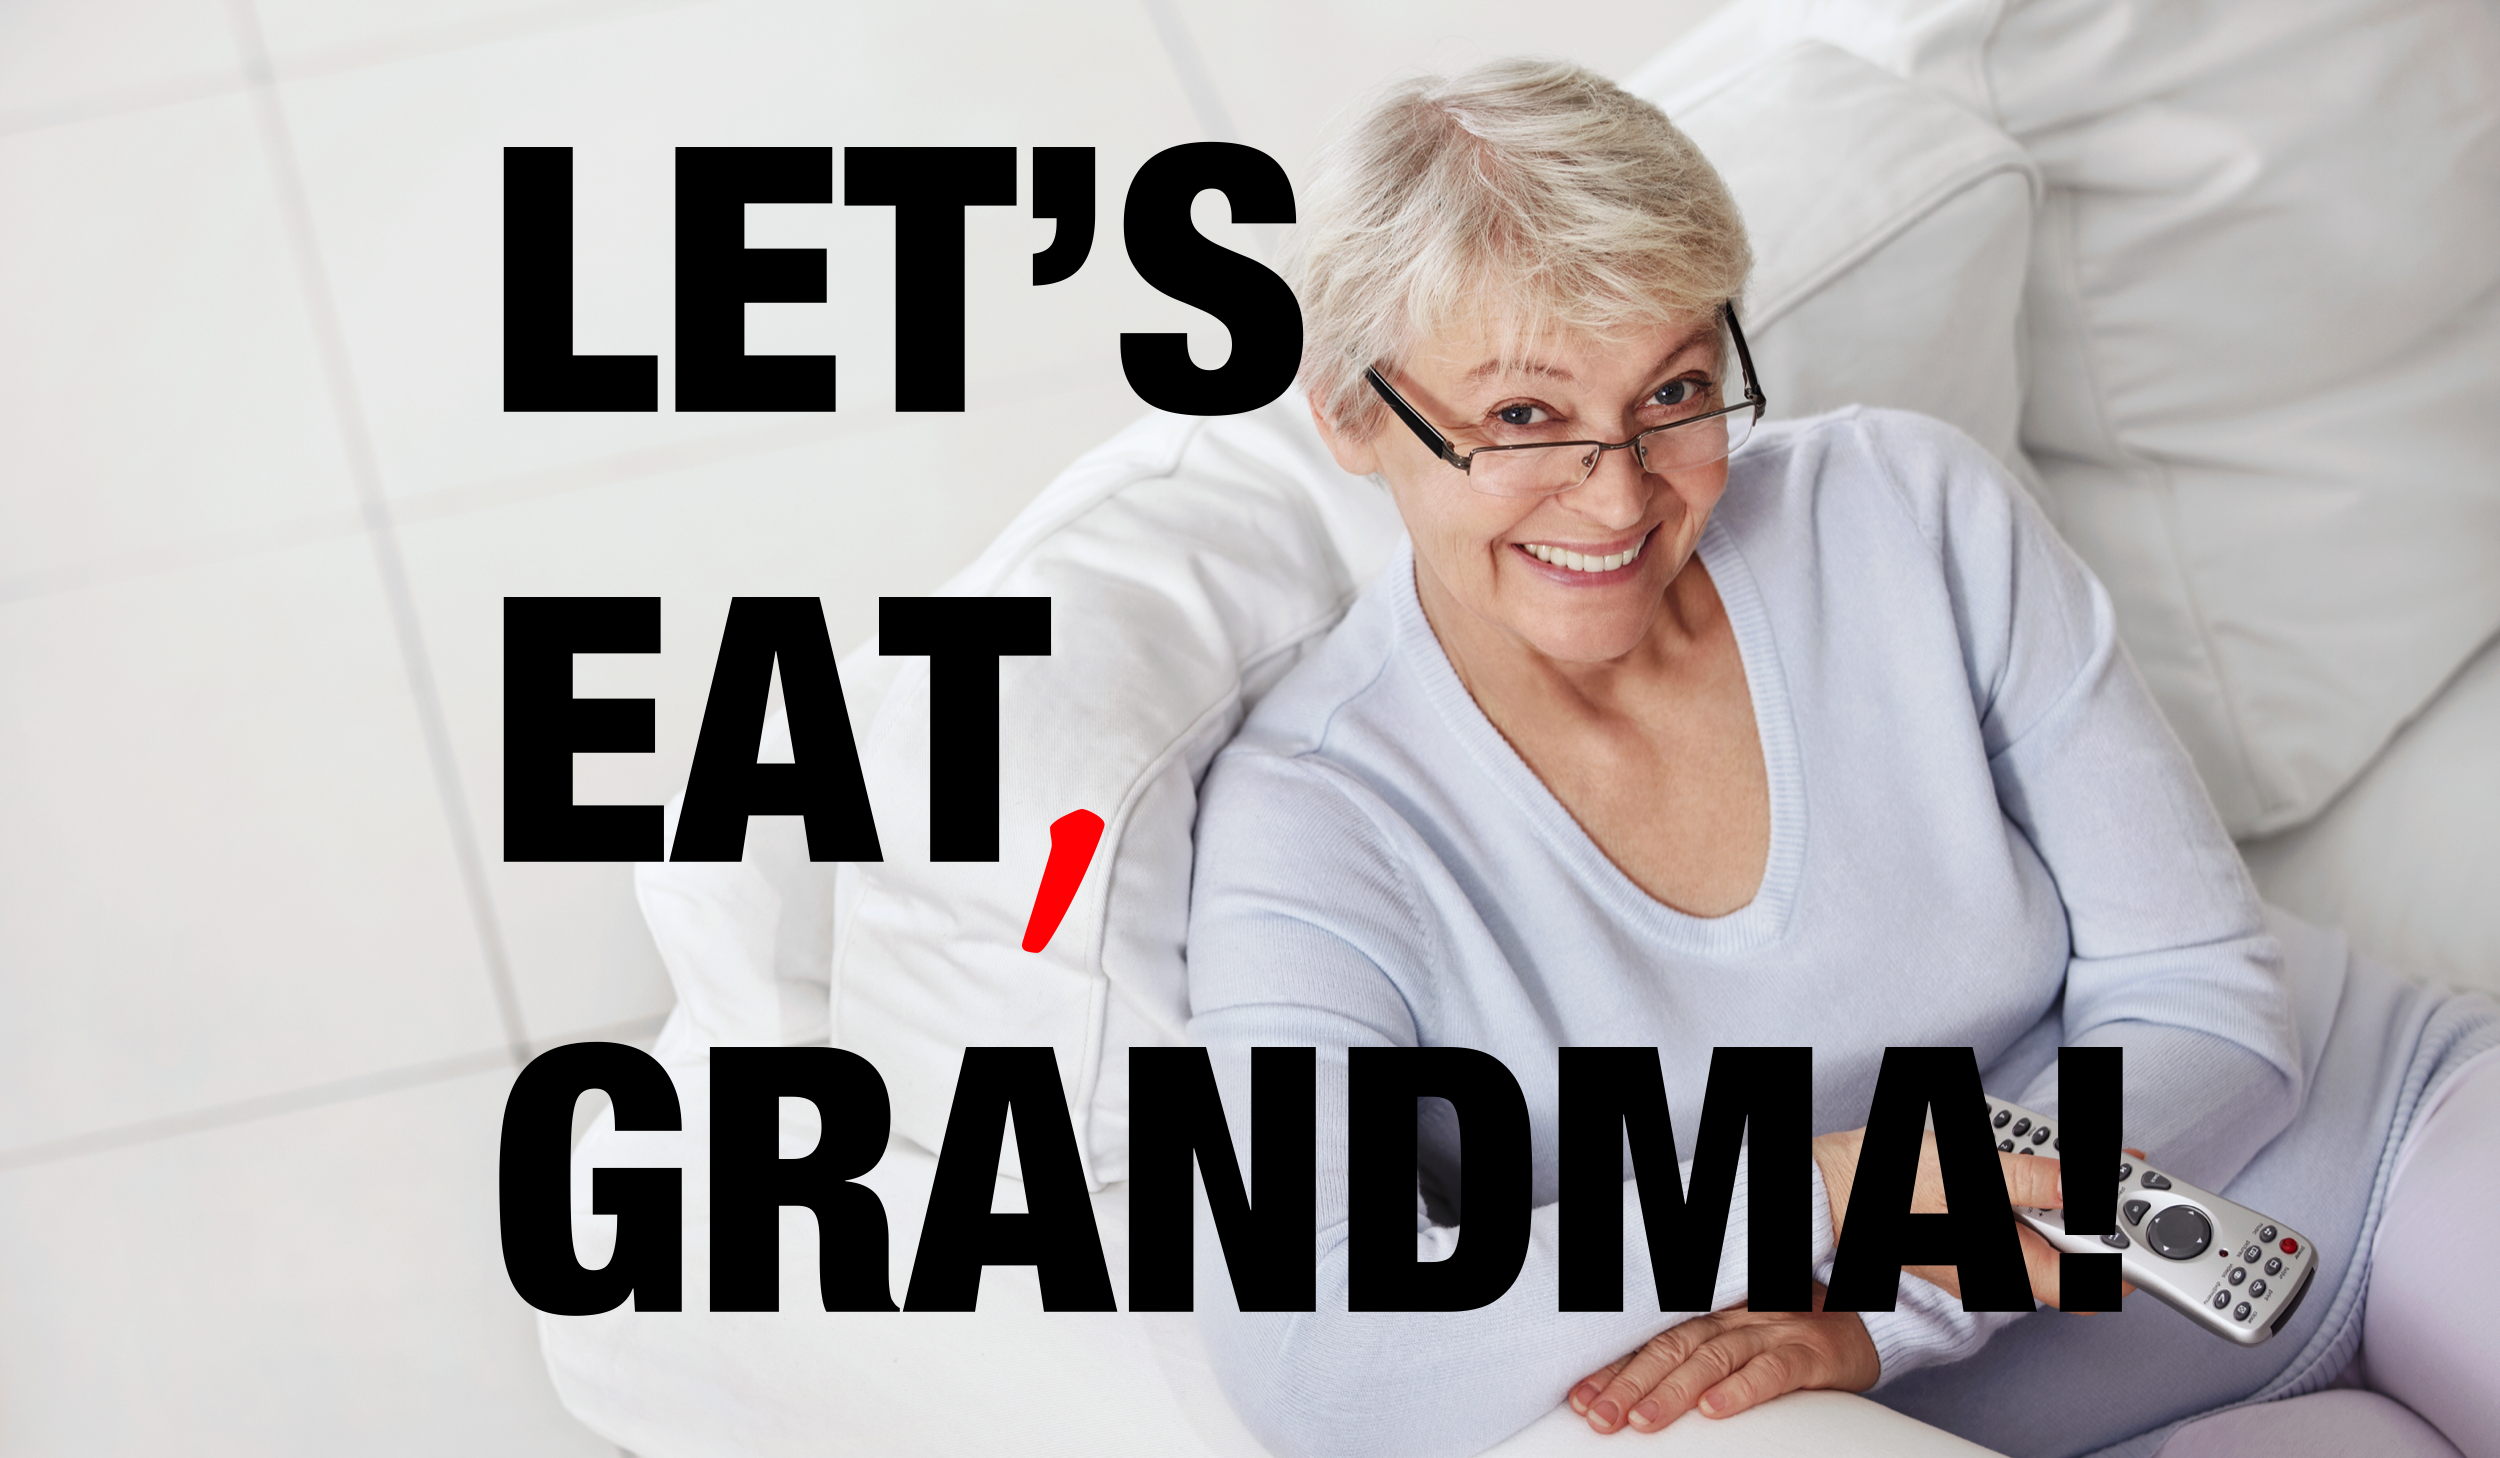 Lets eat, Grandma punctuation example